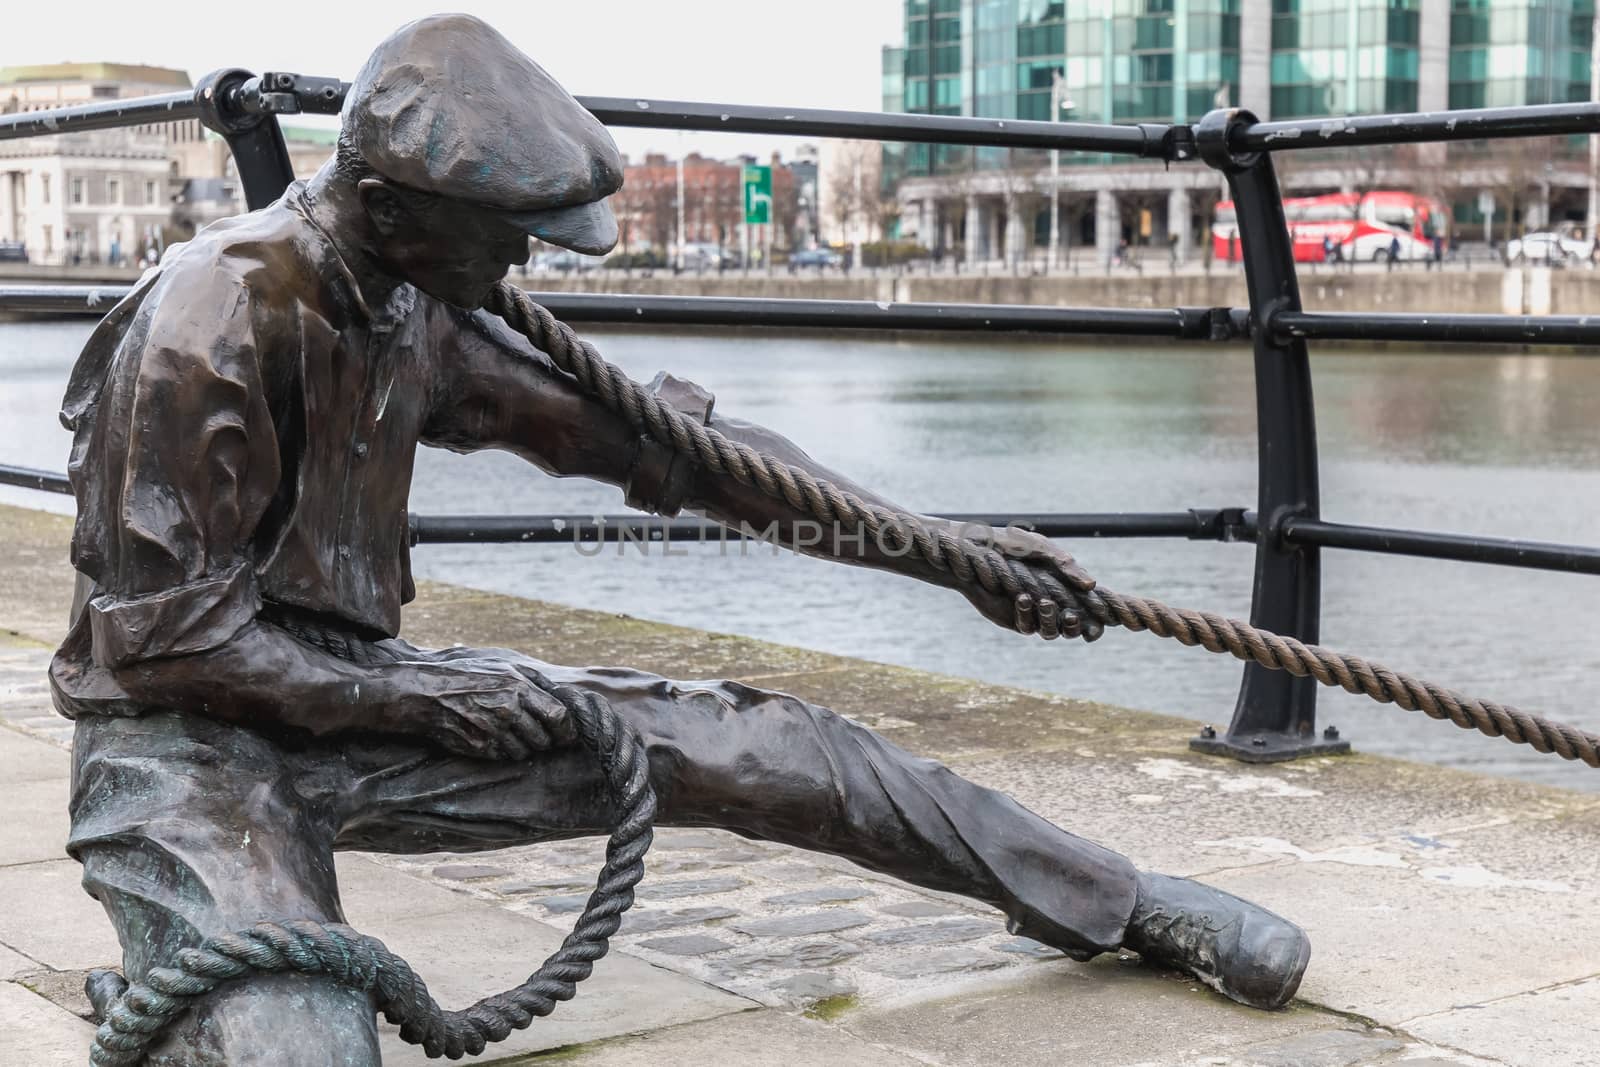 Dublin, Ireland - February 11, 2019: Statue by Dony MacManus of The Linesman on city quay on a winter day